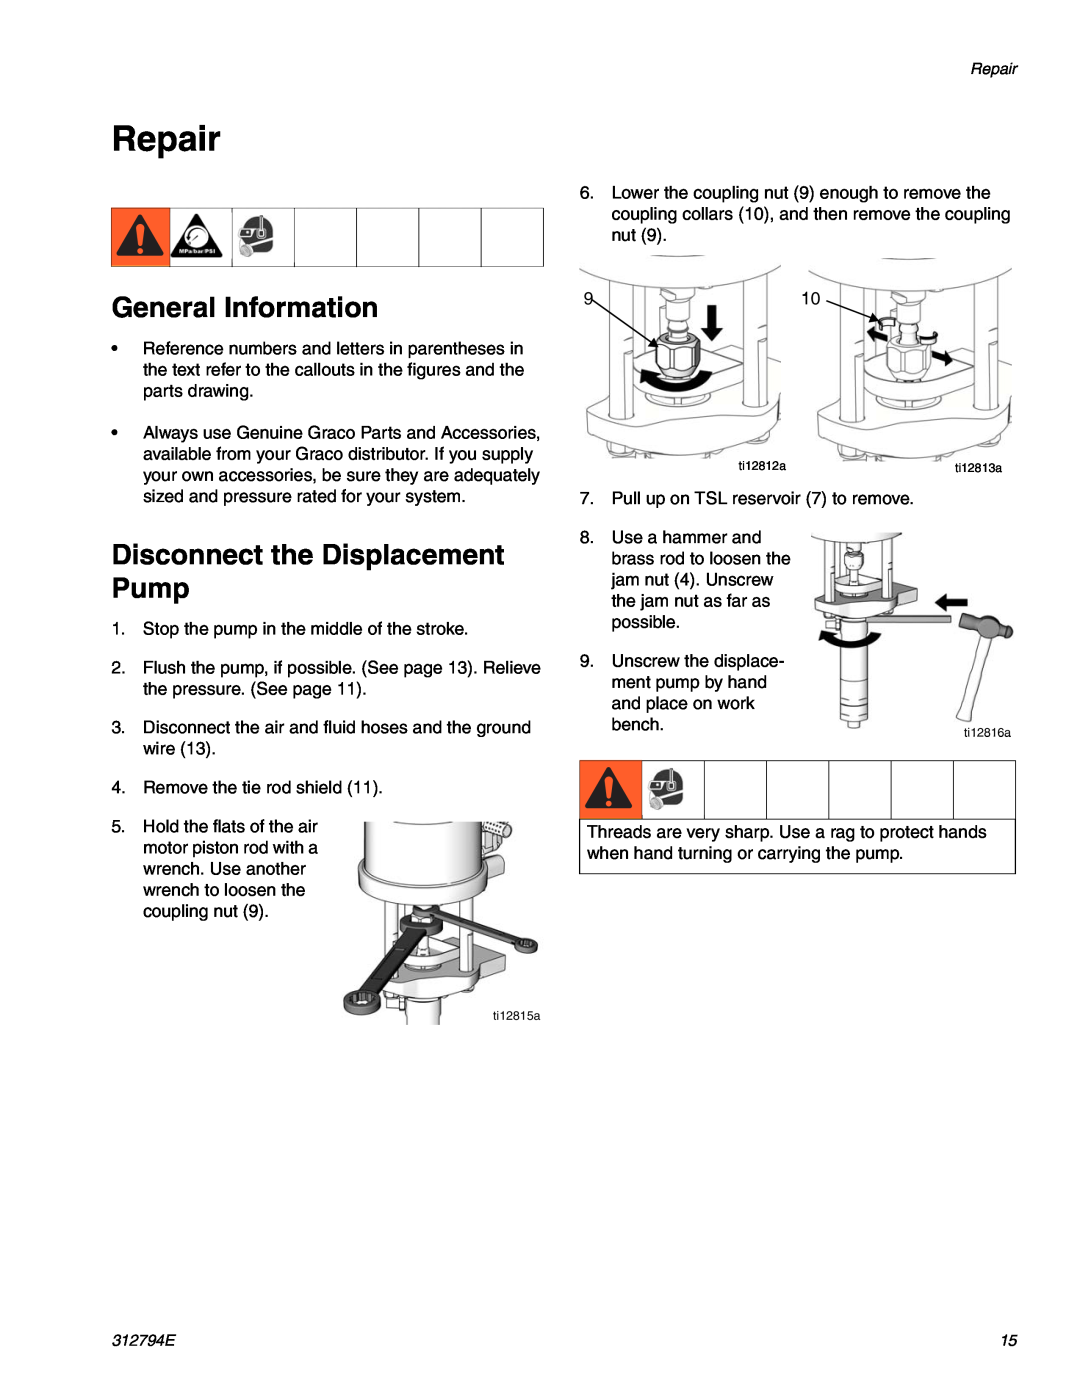 Graco 312794E important safety instructions Repair, Disconnect the Displacement Pump, General Information 